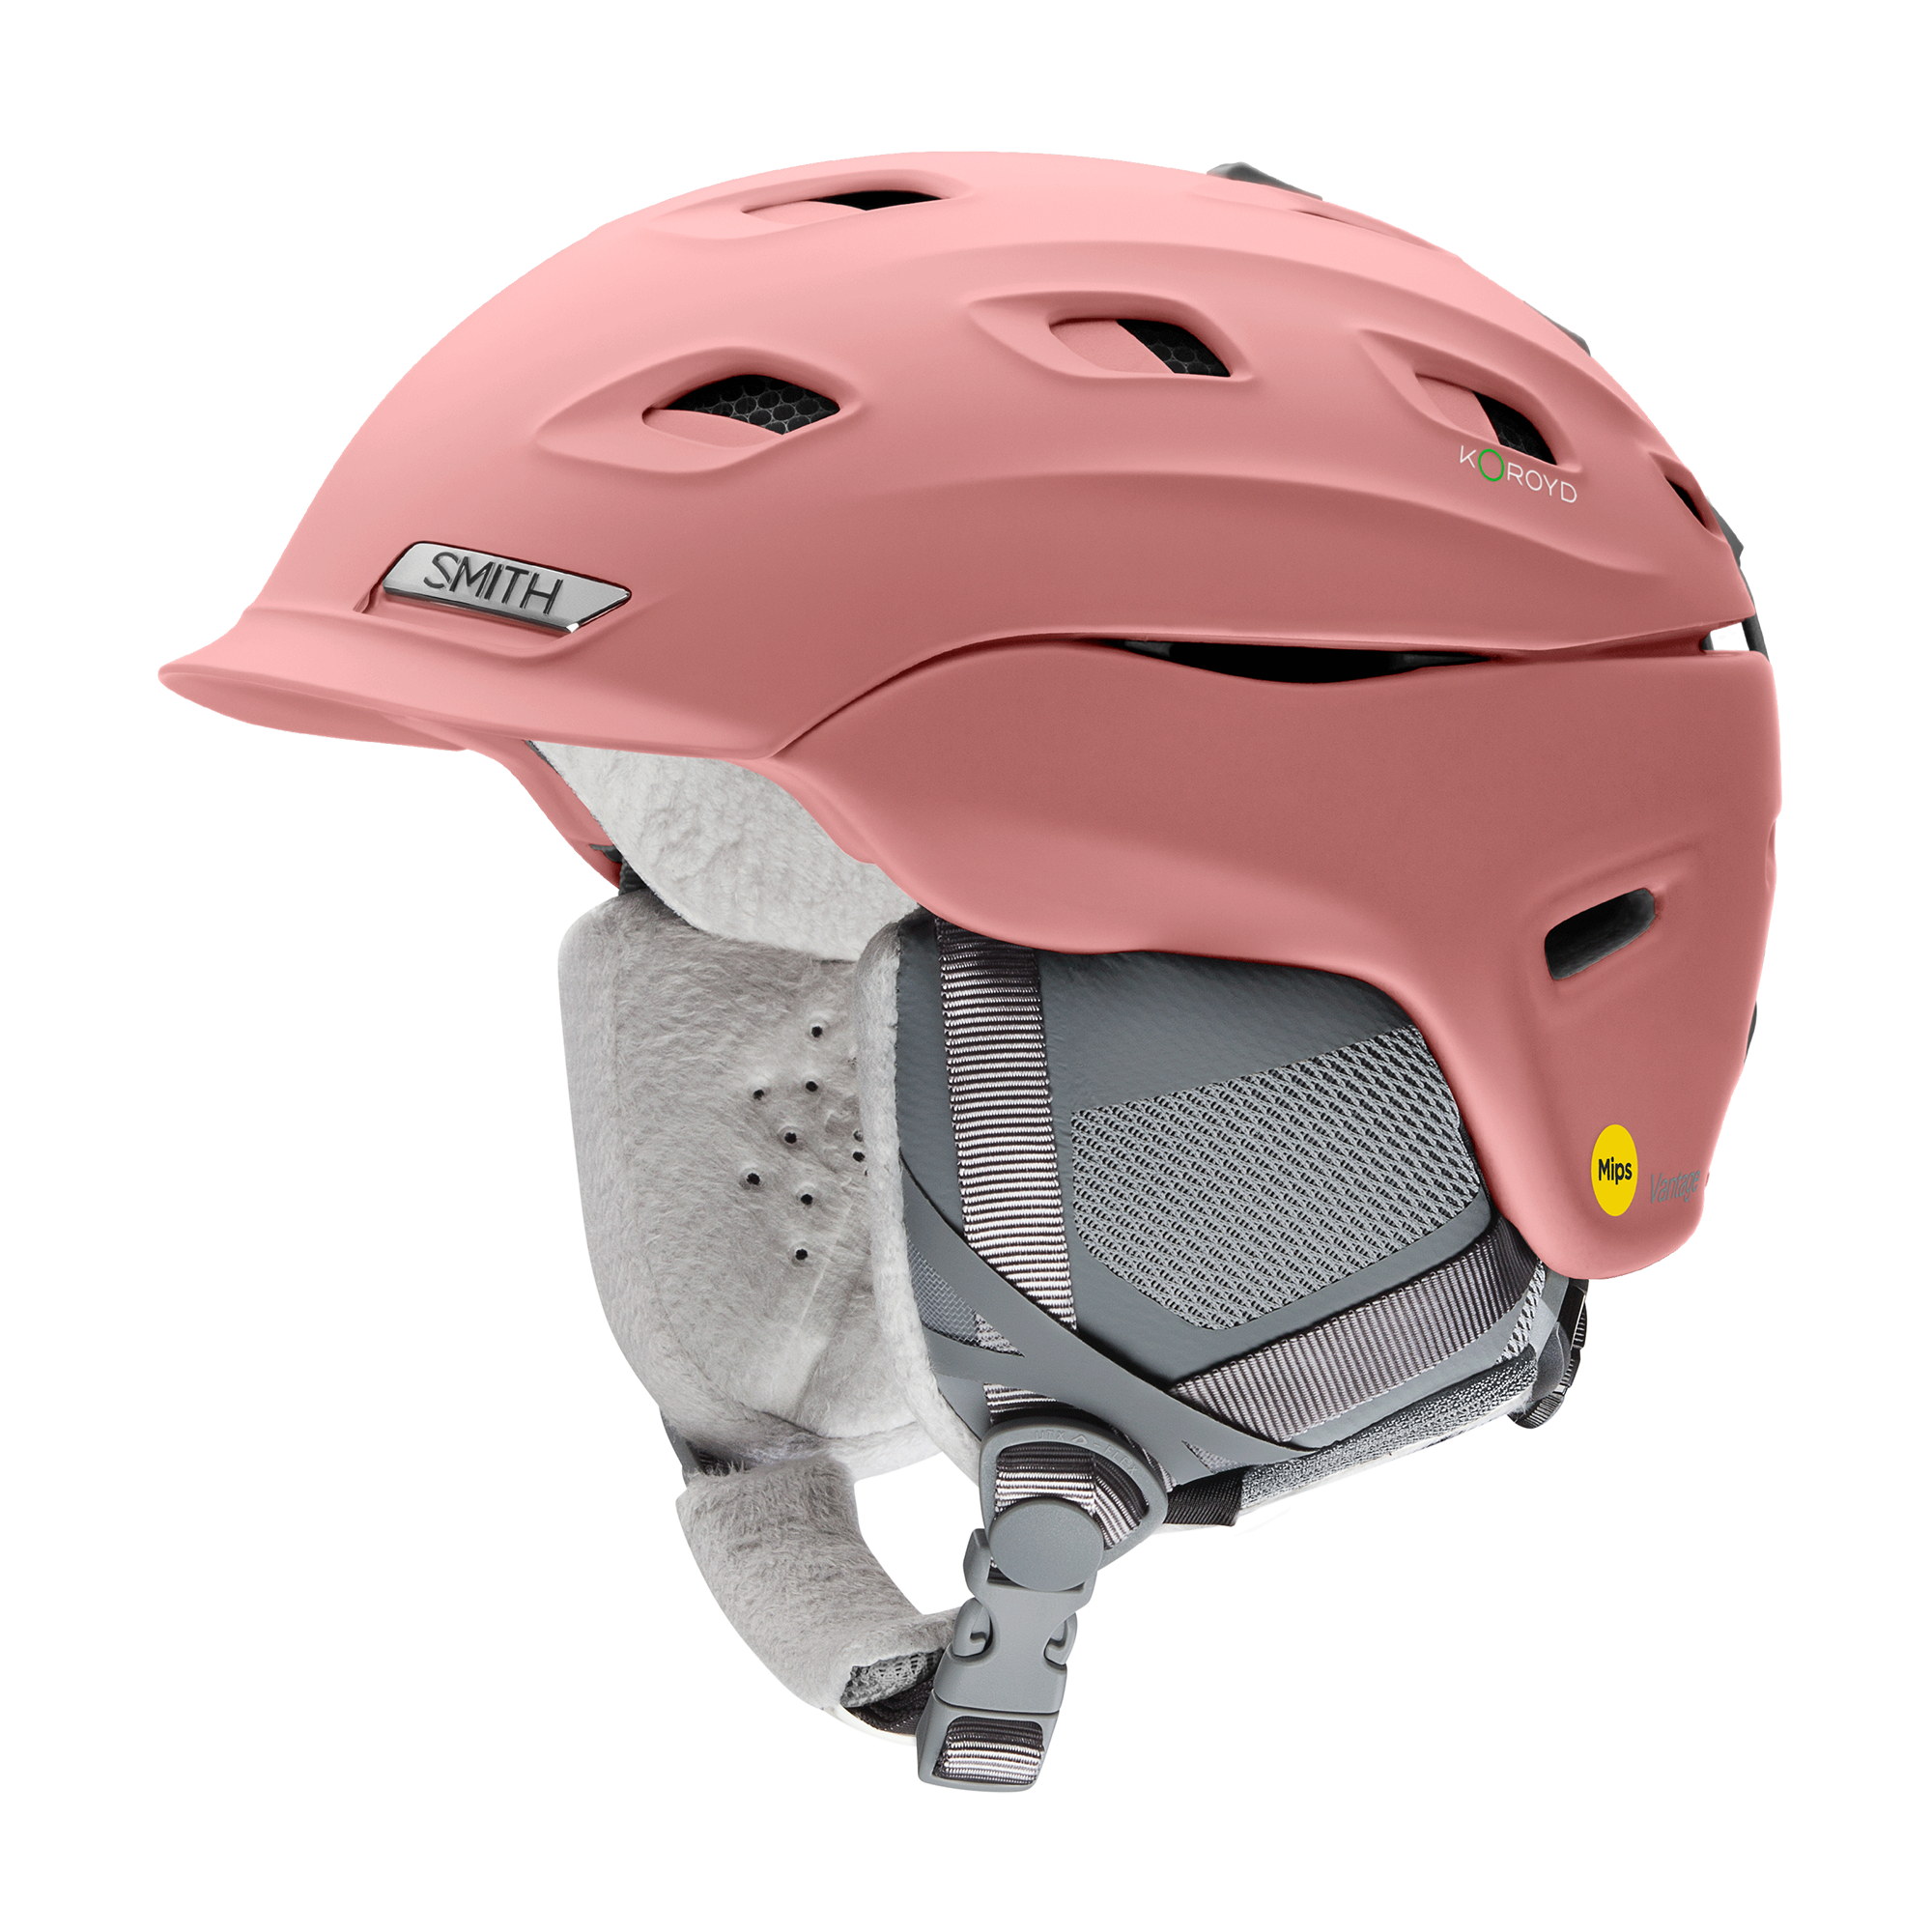 Women's Smith Vantage ski helmet in matte rose with soft grey ear pieces, air vents throughout.